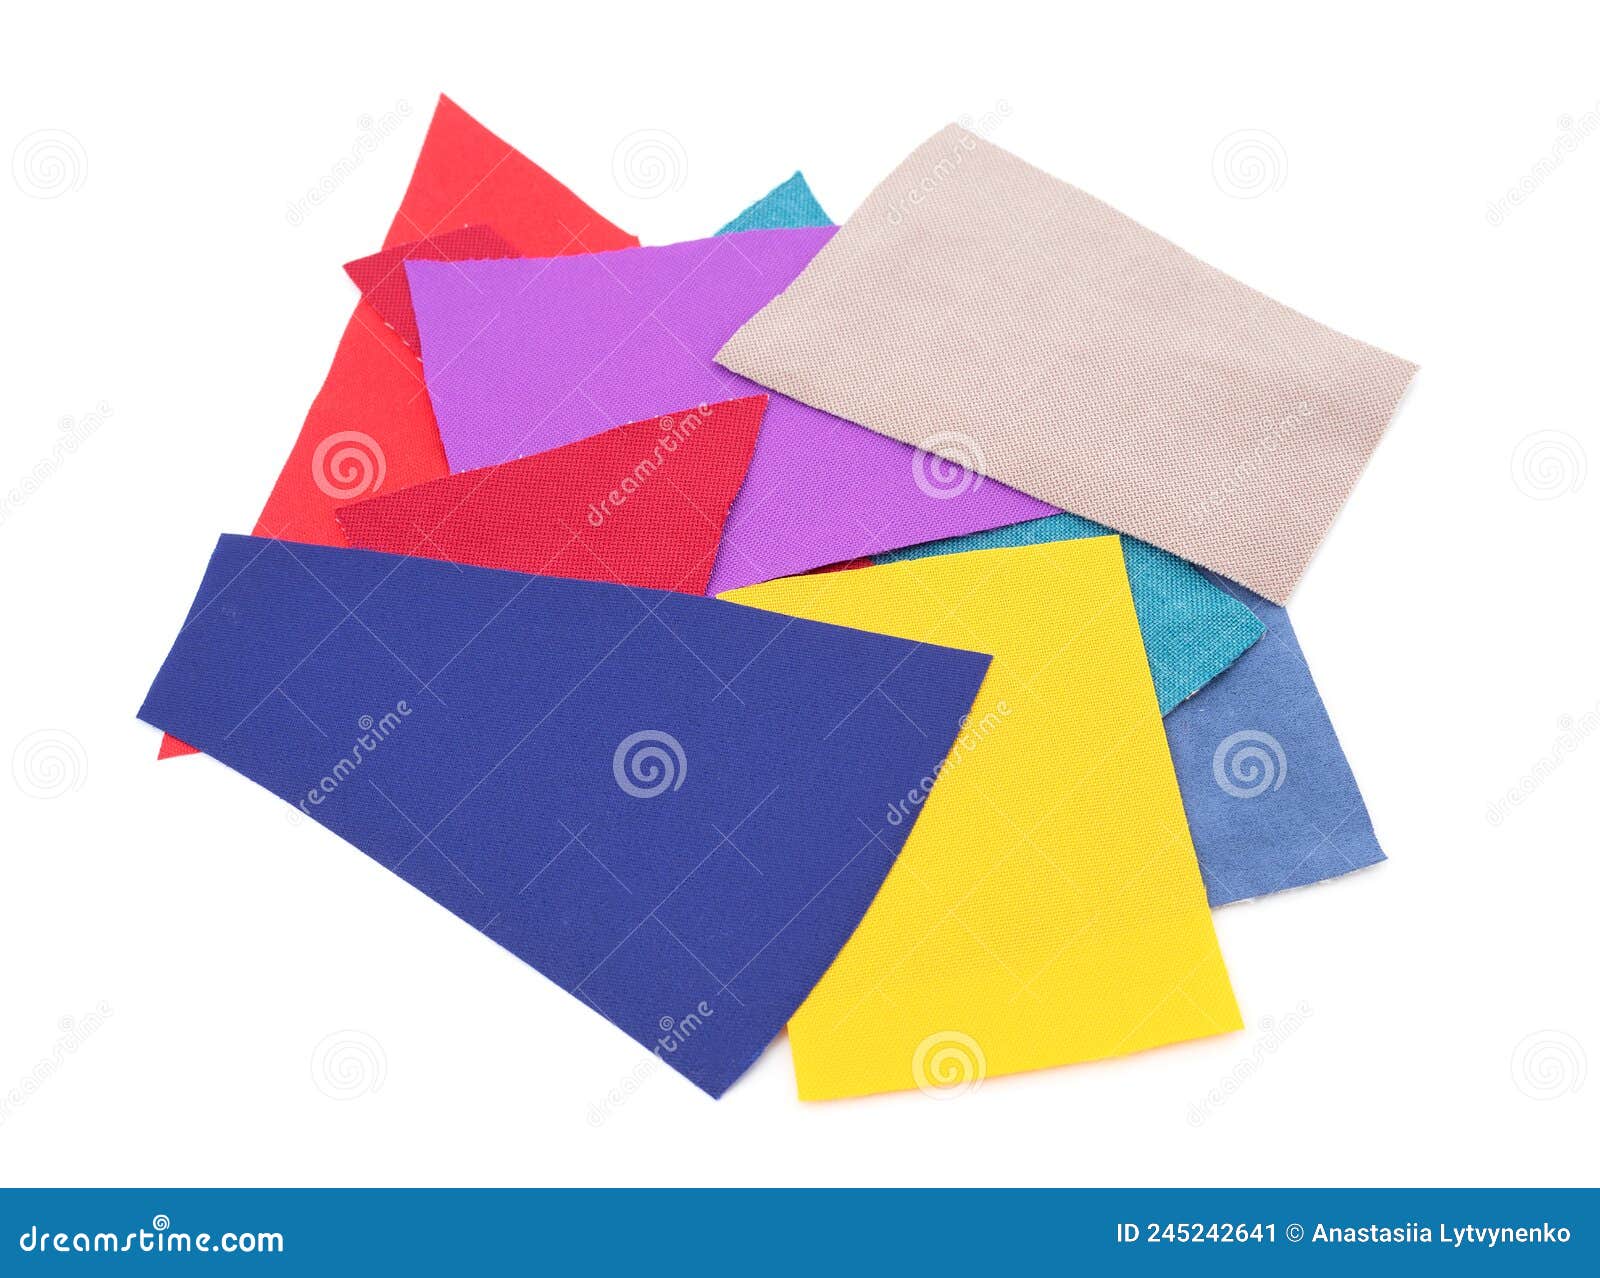 Pieces of Fabric are Multicolored Stock Image - Image of yellow, white ...